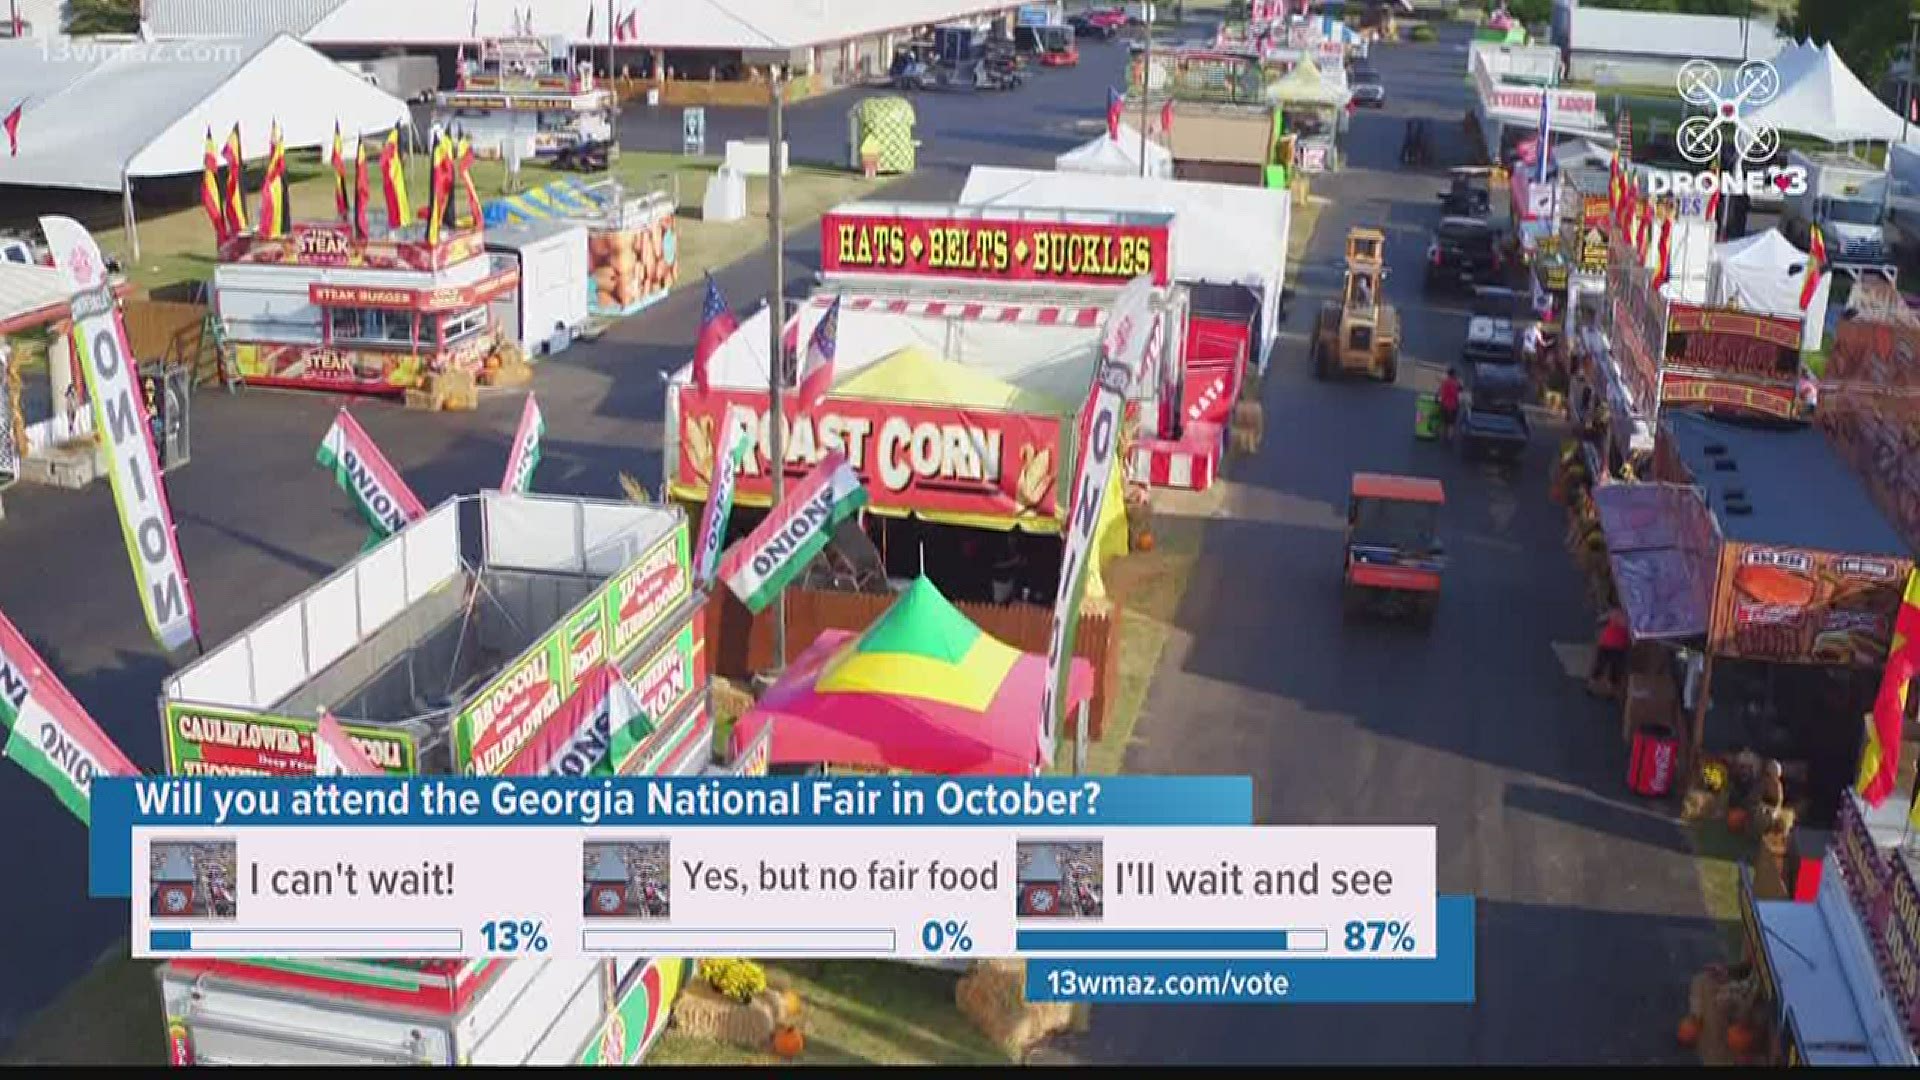 The Georgia National Fairgrounds are opening their doors again, but what's happening to the Georgia National Fair?